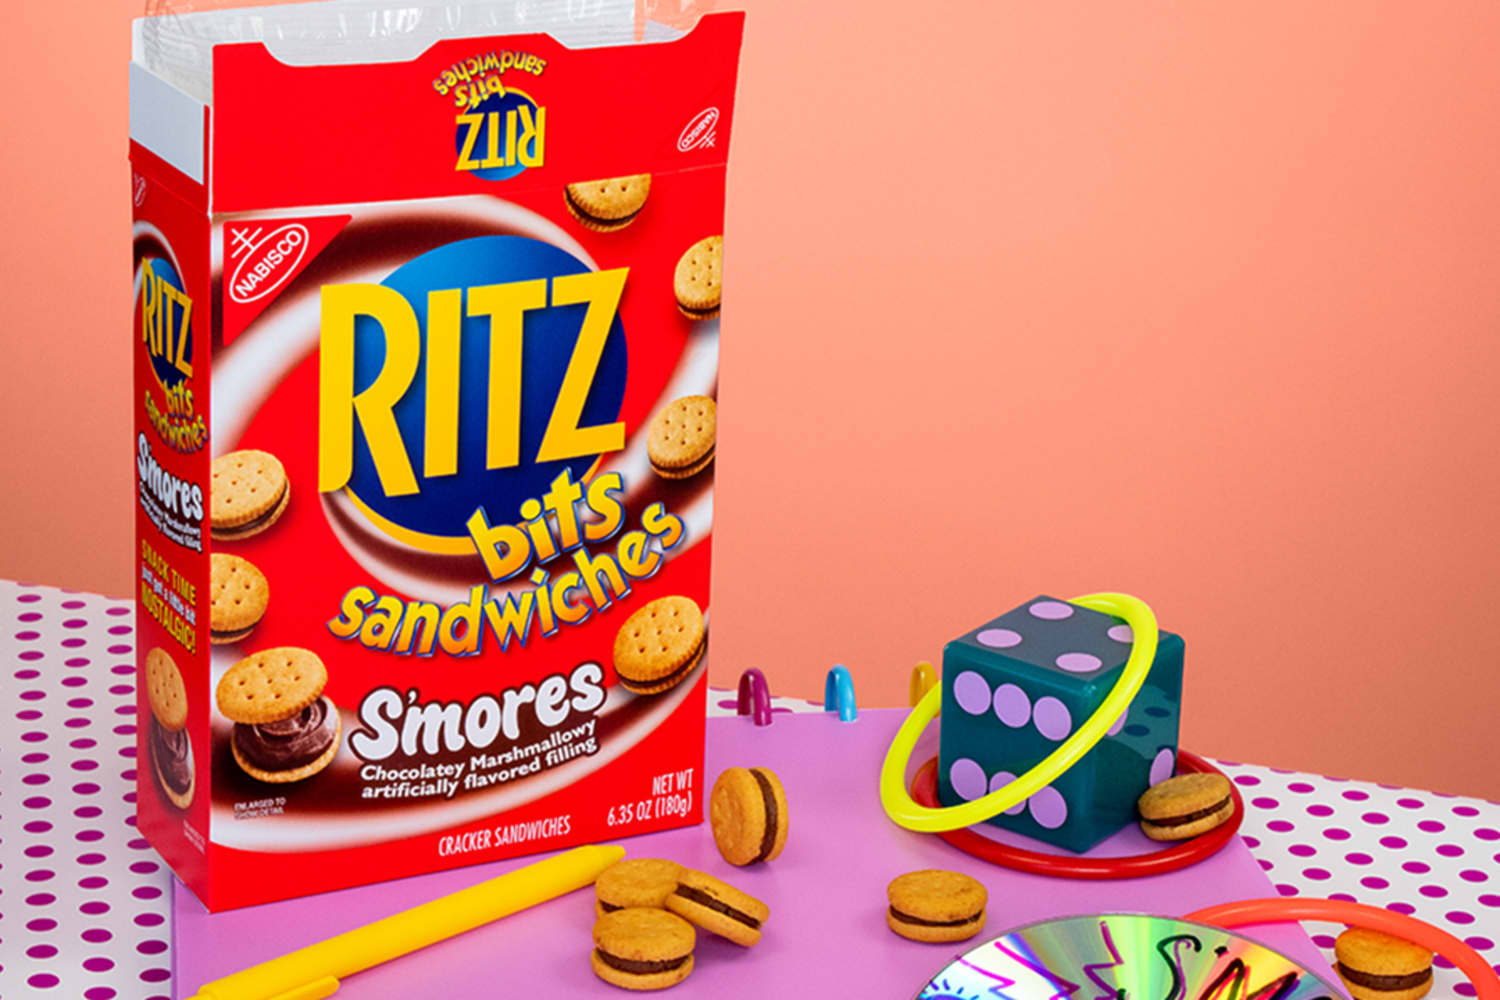 Ritz Bits S'mores Just Made Their Return ... - The Kitchn